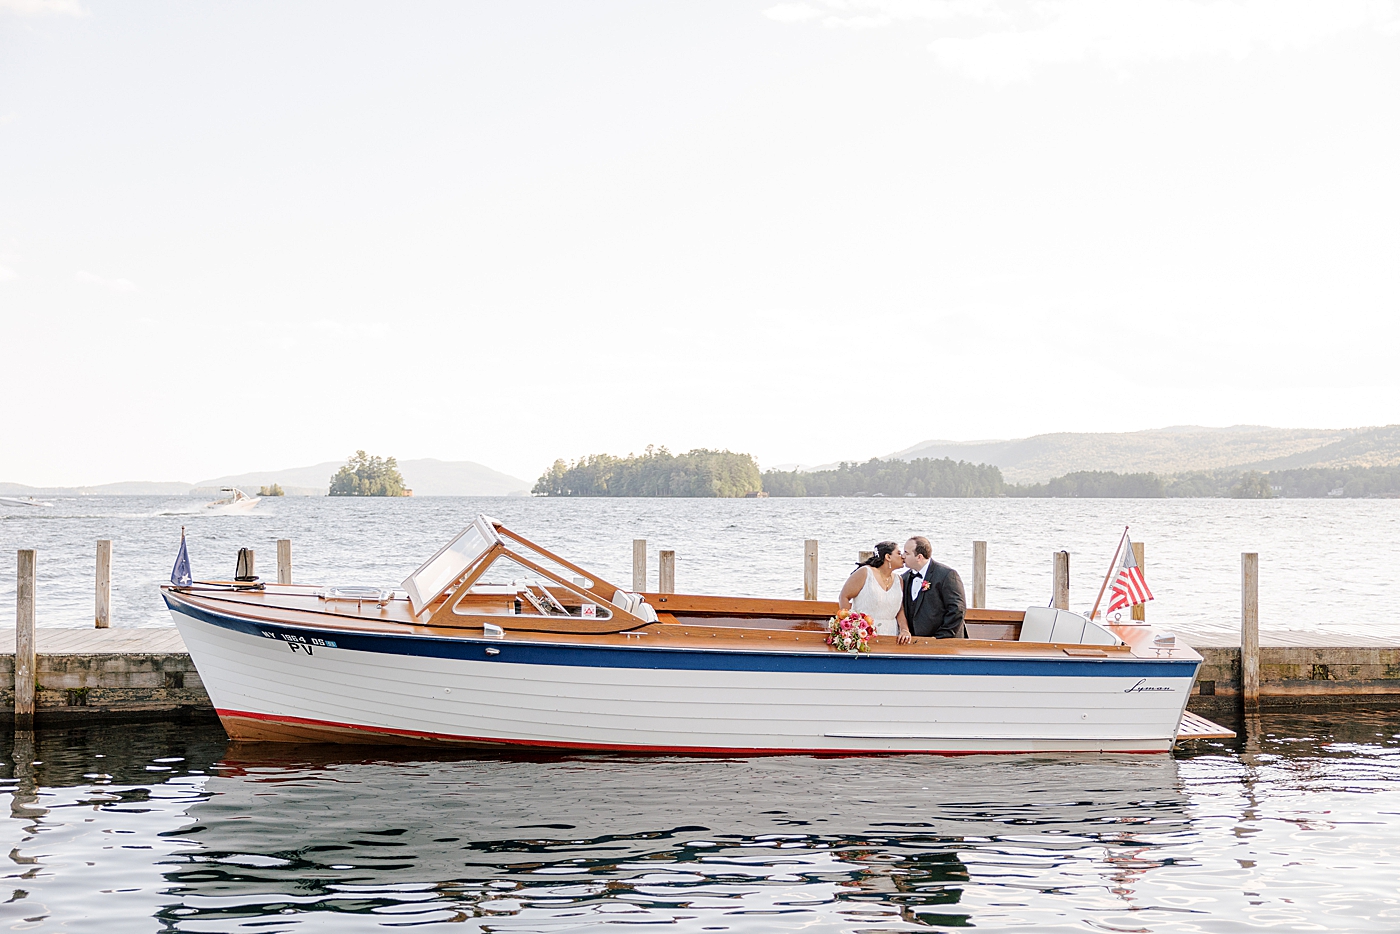 Bride and groom kissing on the back of a wooden boat | Image by Hope Helmuth Photography